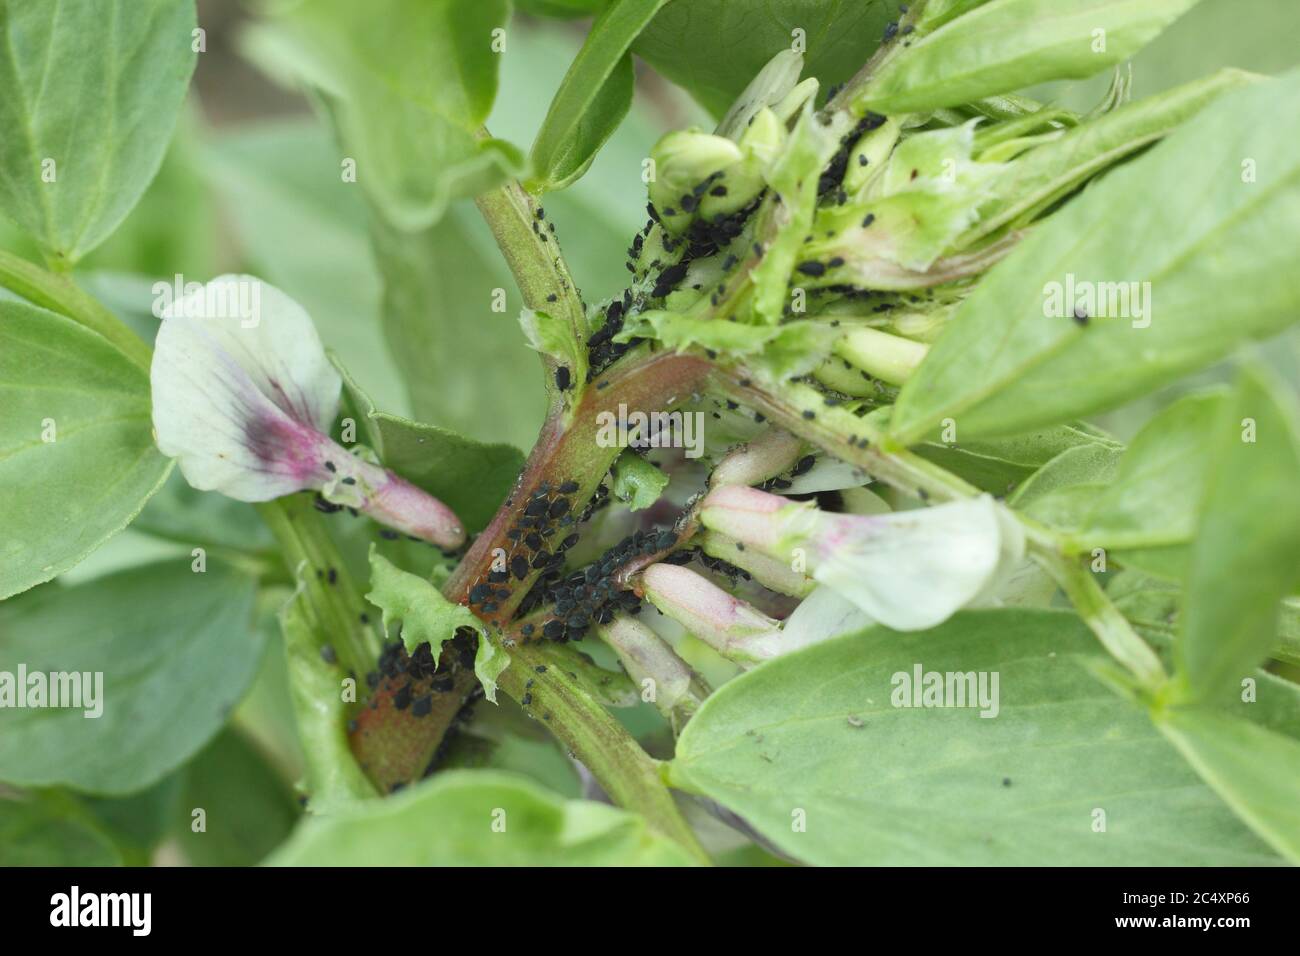 Aphis fabae on Vicia faba 'Bunyard's Exhibition'. Infestation of blackfly, a type of aphid, on the soft growth of a broad bean plant. UK Stock Photo